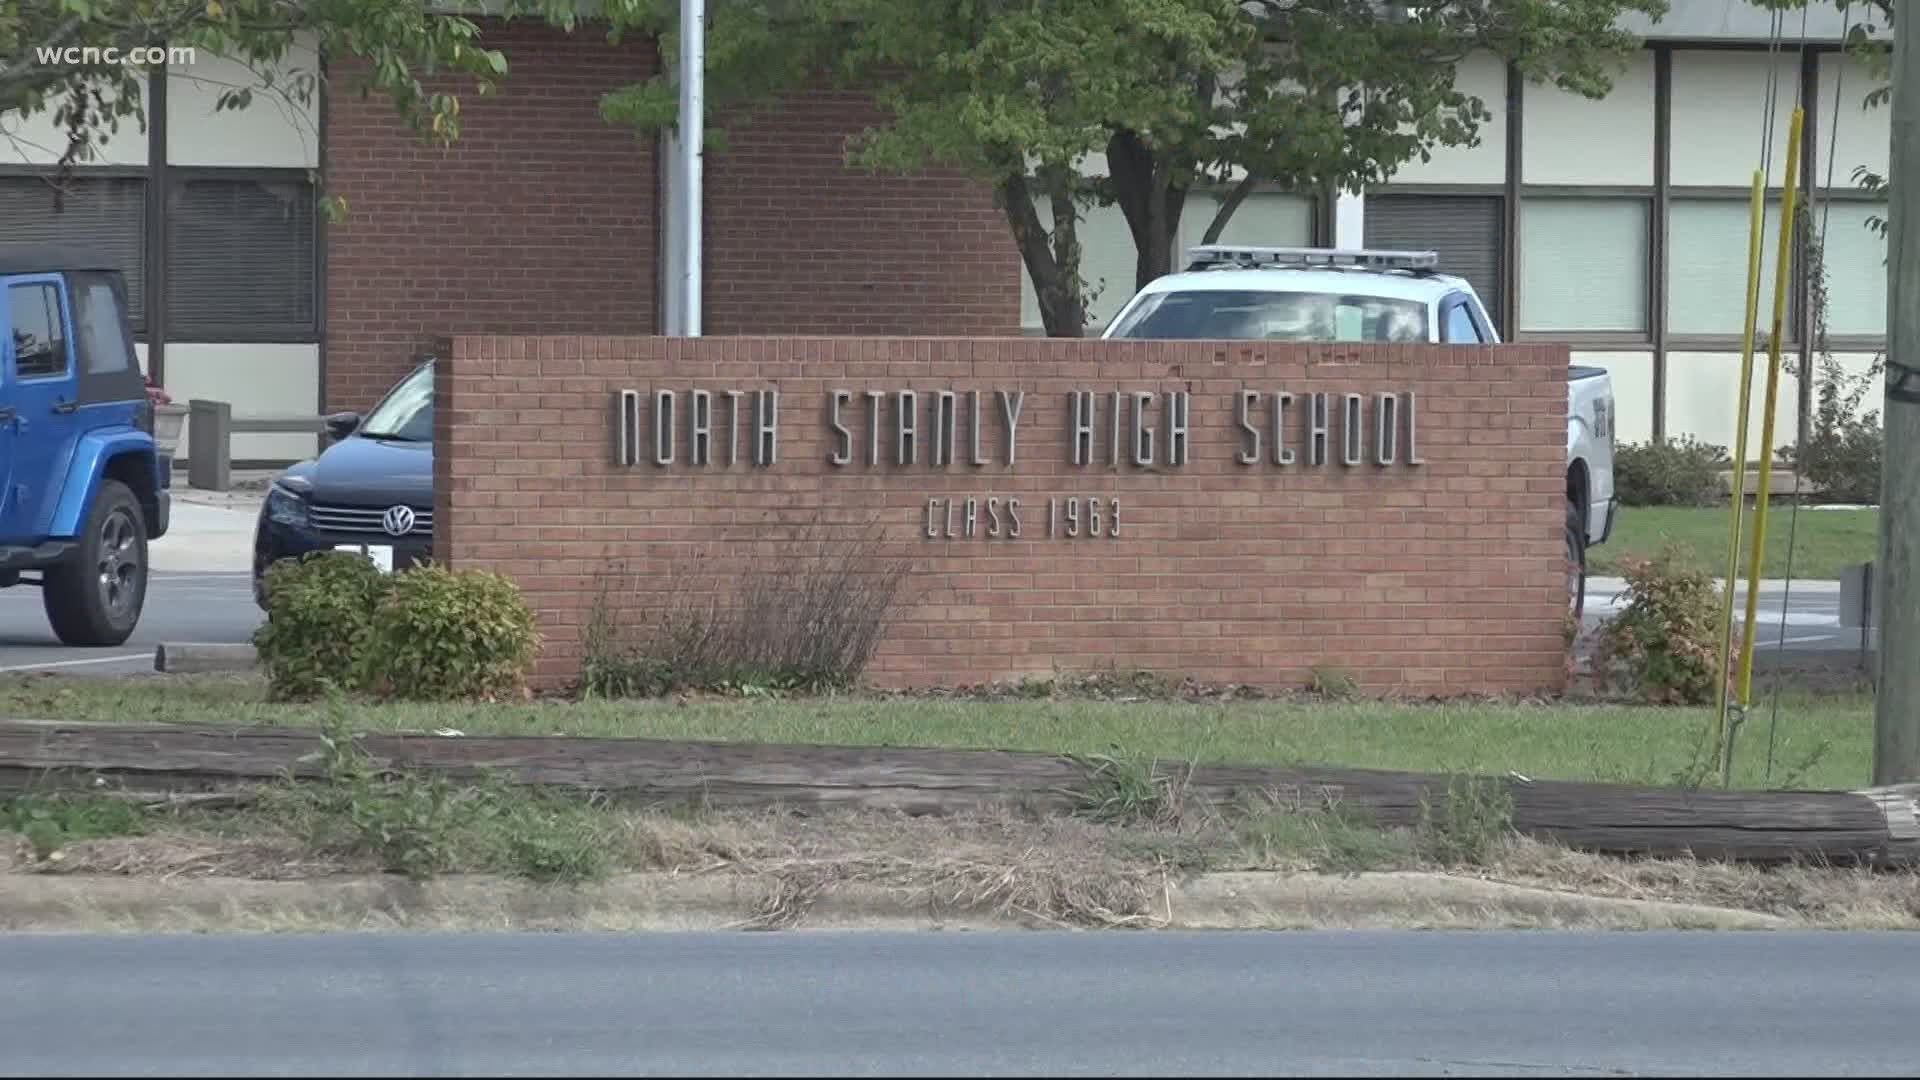 Several staff members at North Stanly High School have tested positive for Coronavirus. The school will do remote learning for two weeks.